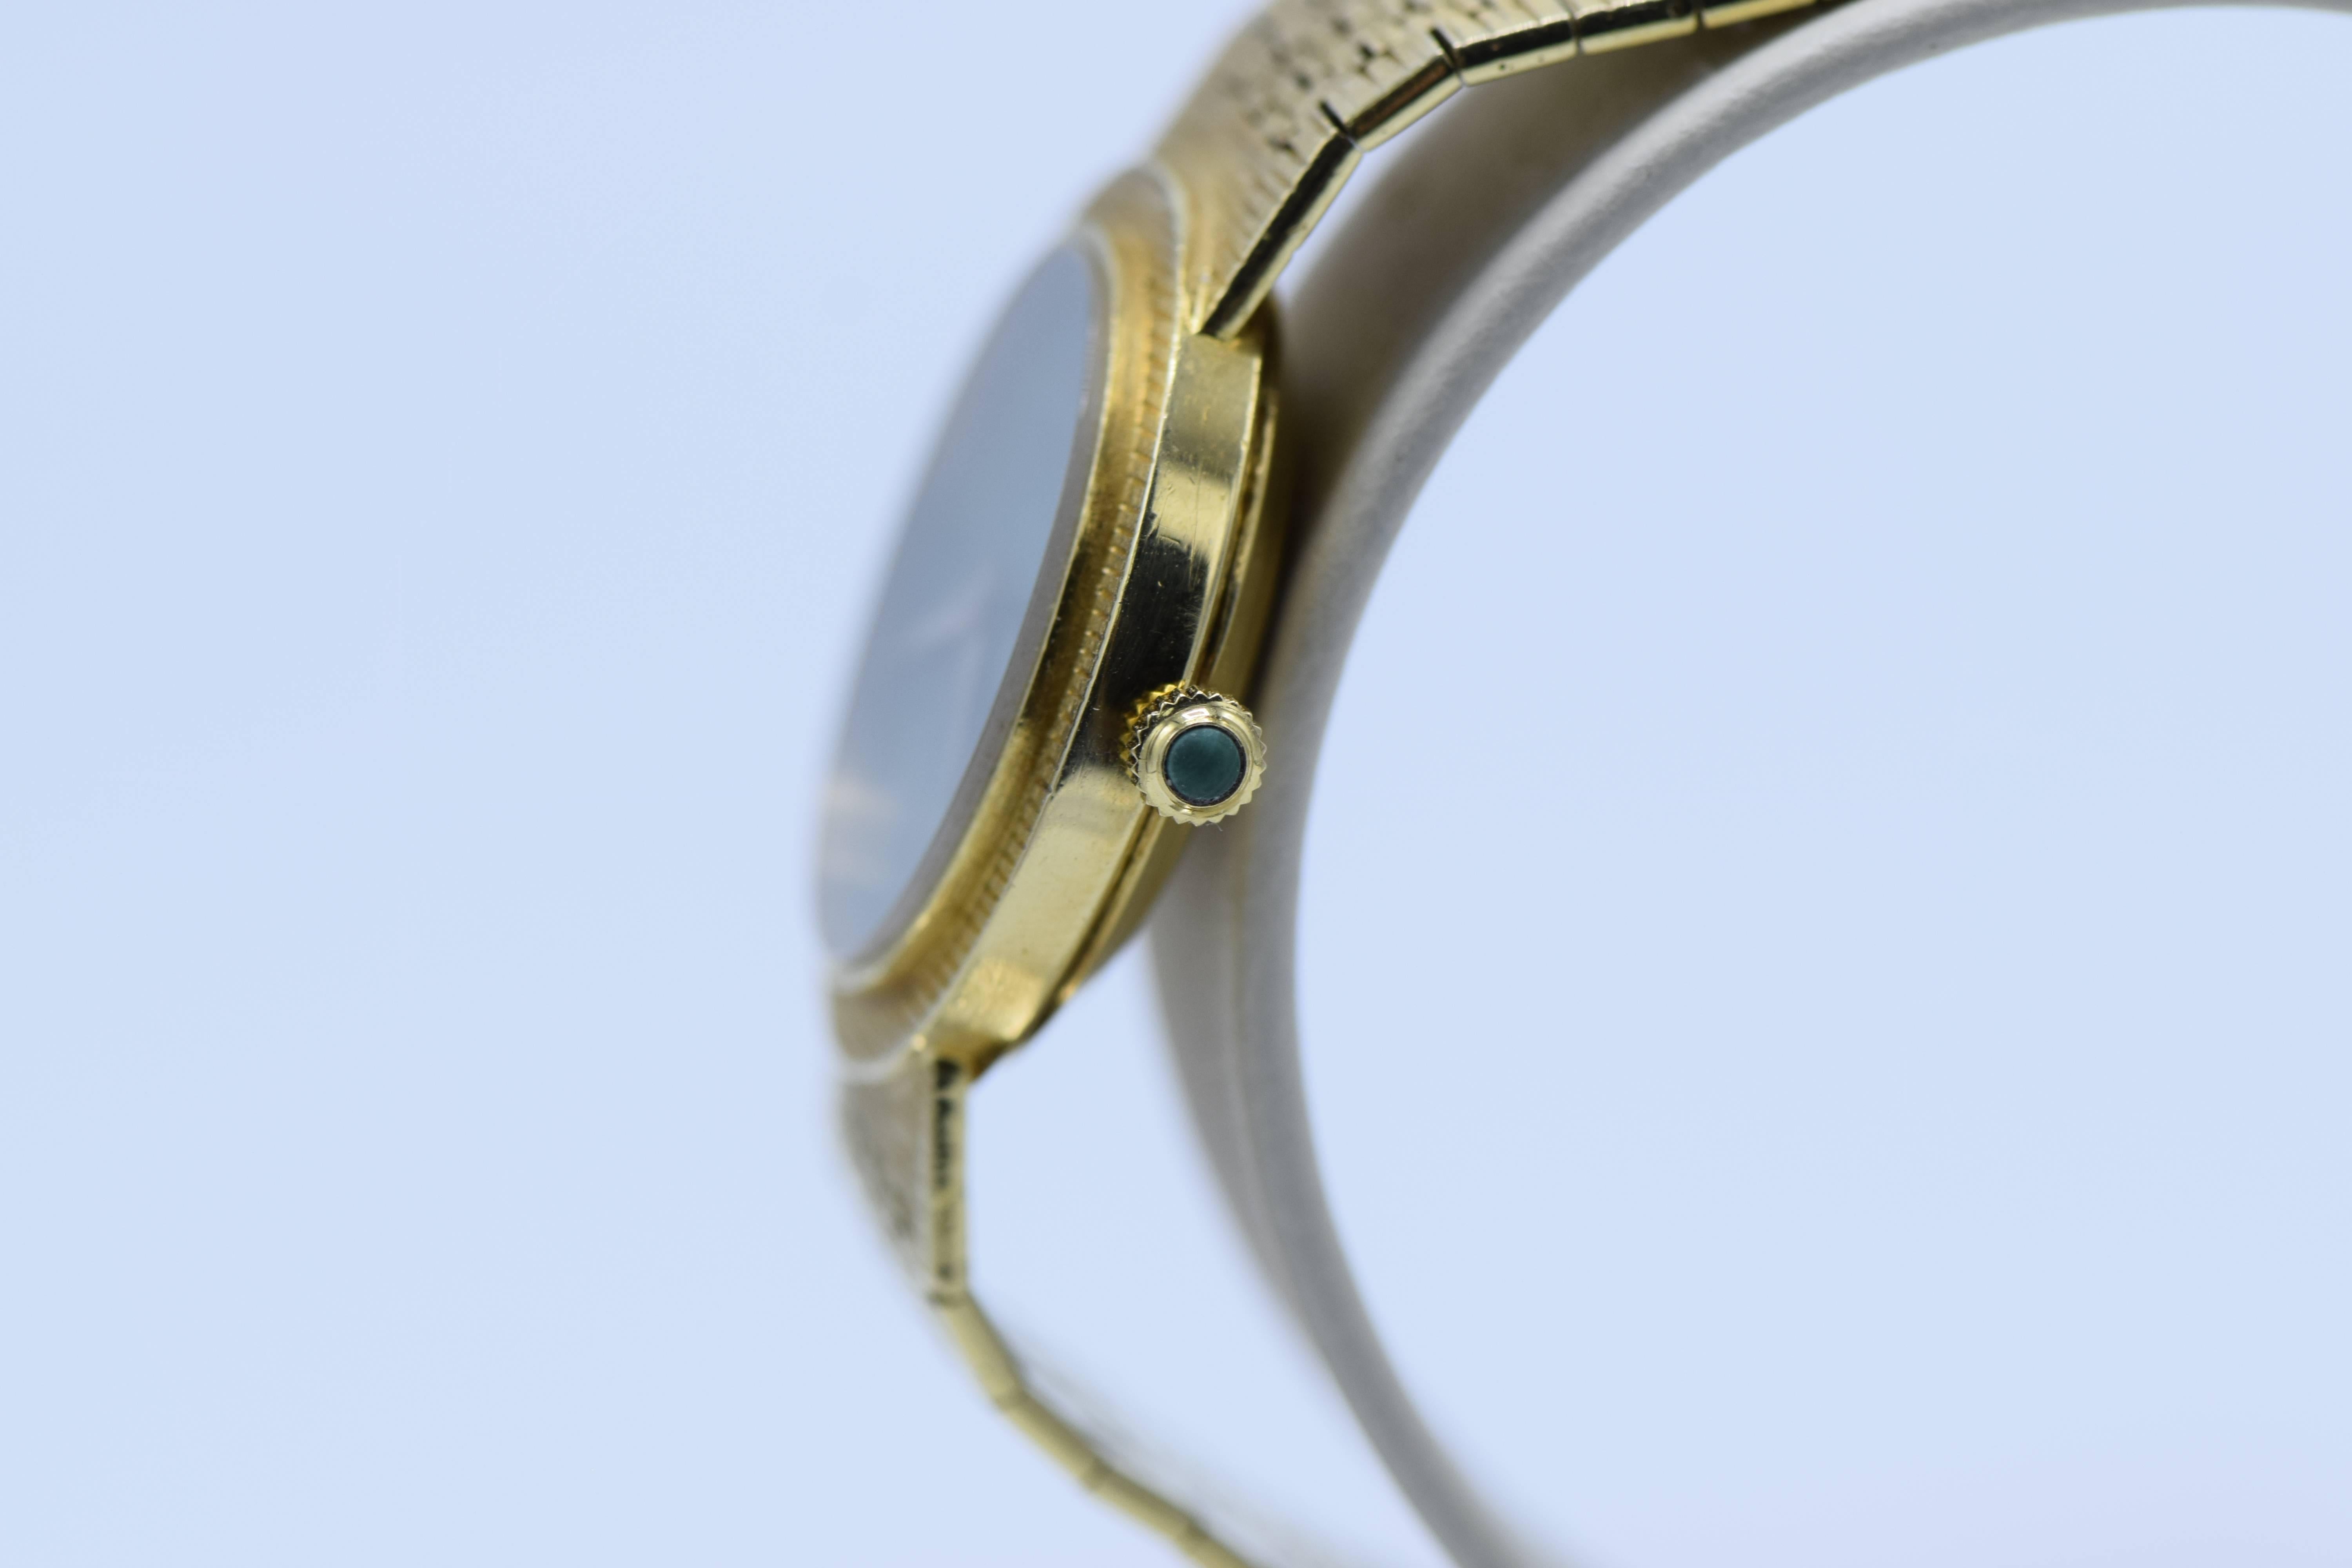 Working condition 

Malachite Dial has hairline cracks that is not visible to the eye 